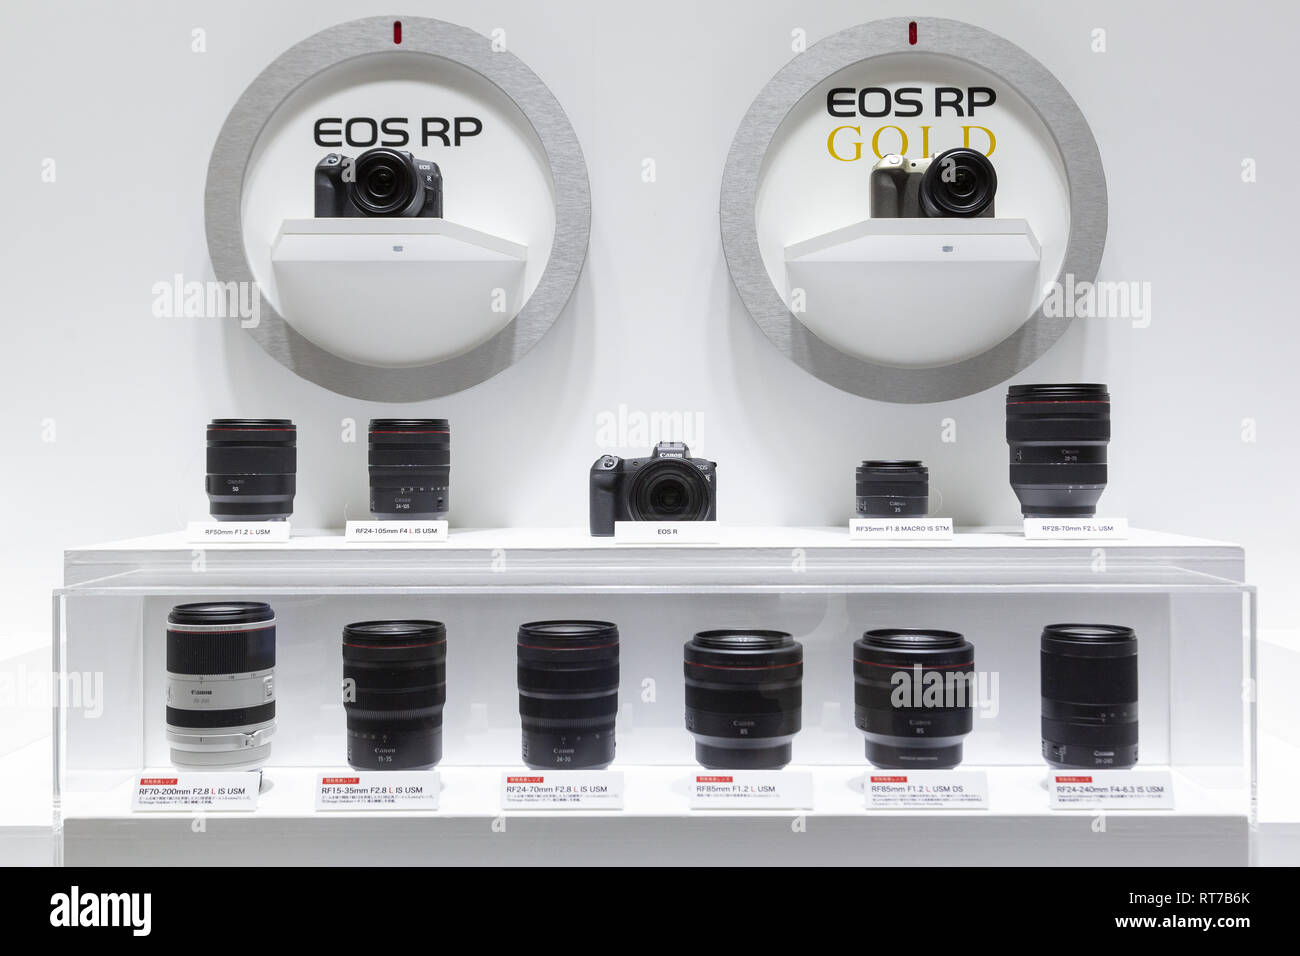 Yokohama, Japan. 28th Feb, 2019. Canon EOS RP and EOS RP Gold cameras (top) and RF lenses on display during the CP  Camera & Photo Imaging Show 2019 at Pacifico Yokohama. The CP  exhibition showcases the latest technologies for cameras and photo imaging in Japan in 1,148 exhibitor booths. Organizers expect to attract 70,000 visitors during the four-day show. This year's exhibition is held at the Pacifico Yokohama and OSANBASHI Hall and runs until March 3rd. Credit: Rodrigo Reyes Marin/ZUMA Wire/Alamy Live News Stock Photo